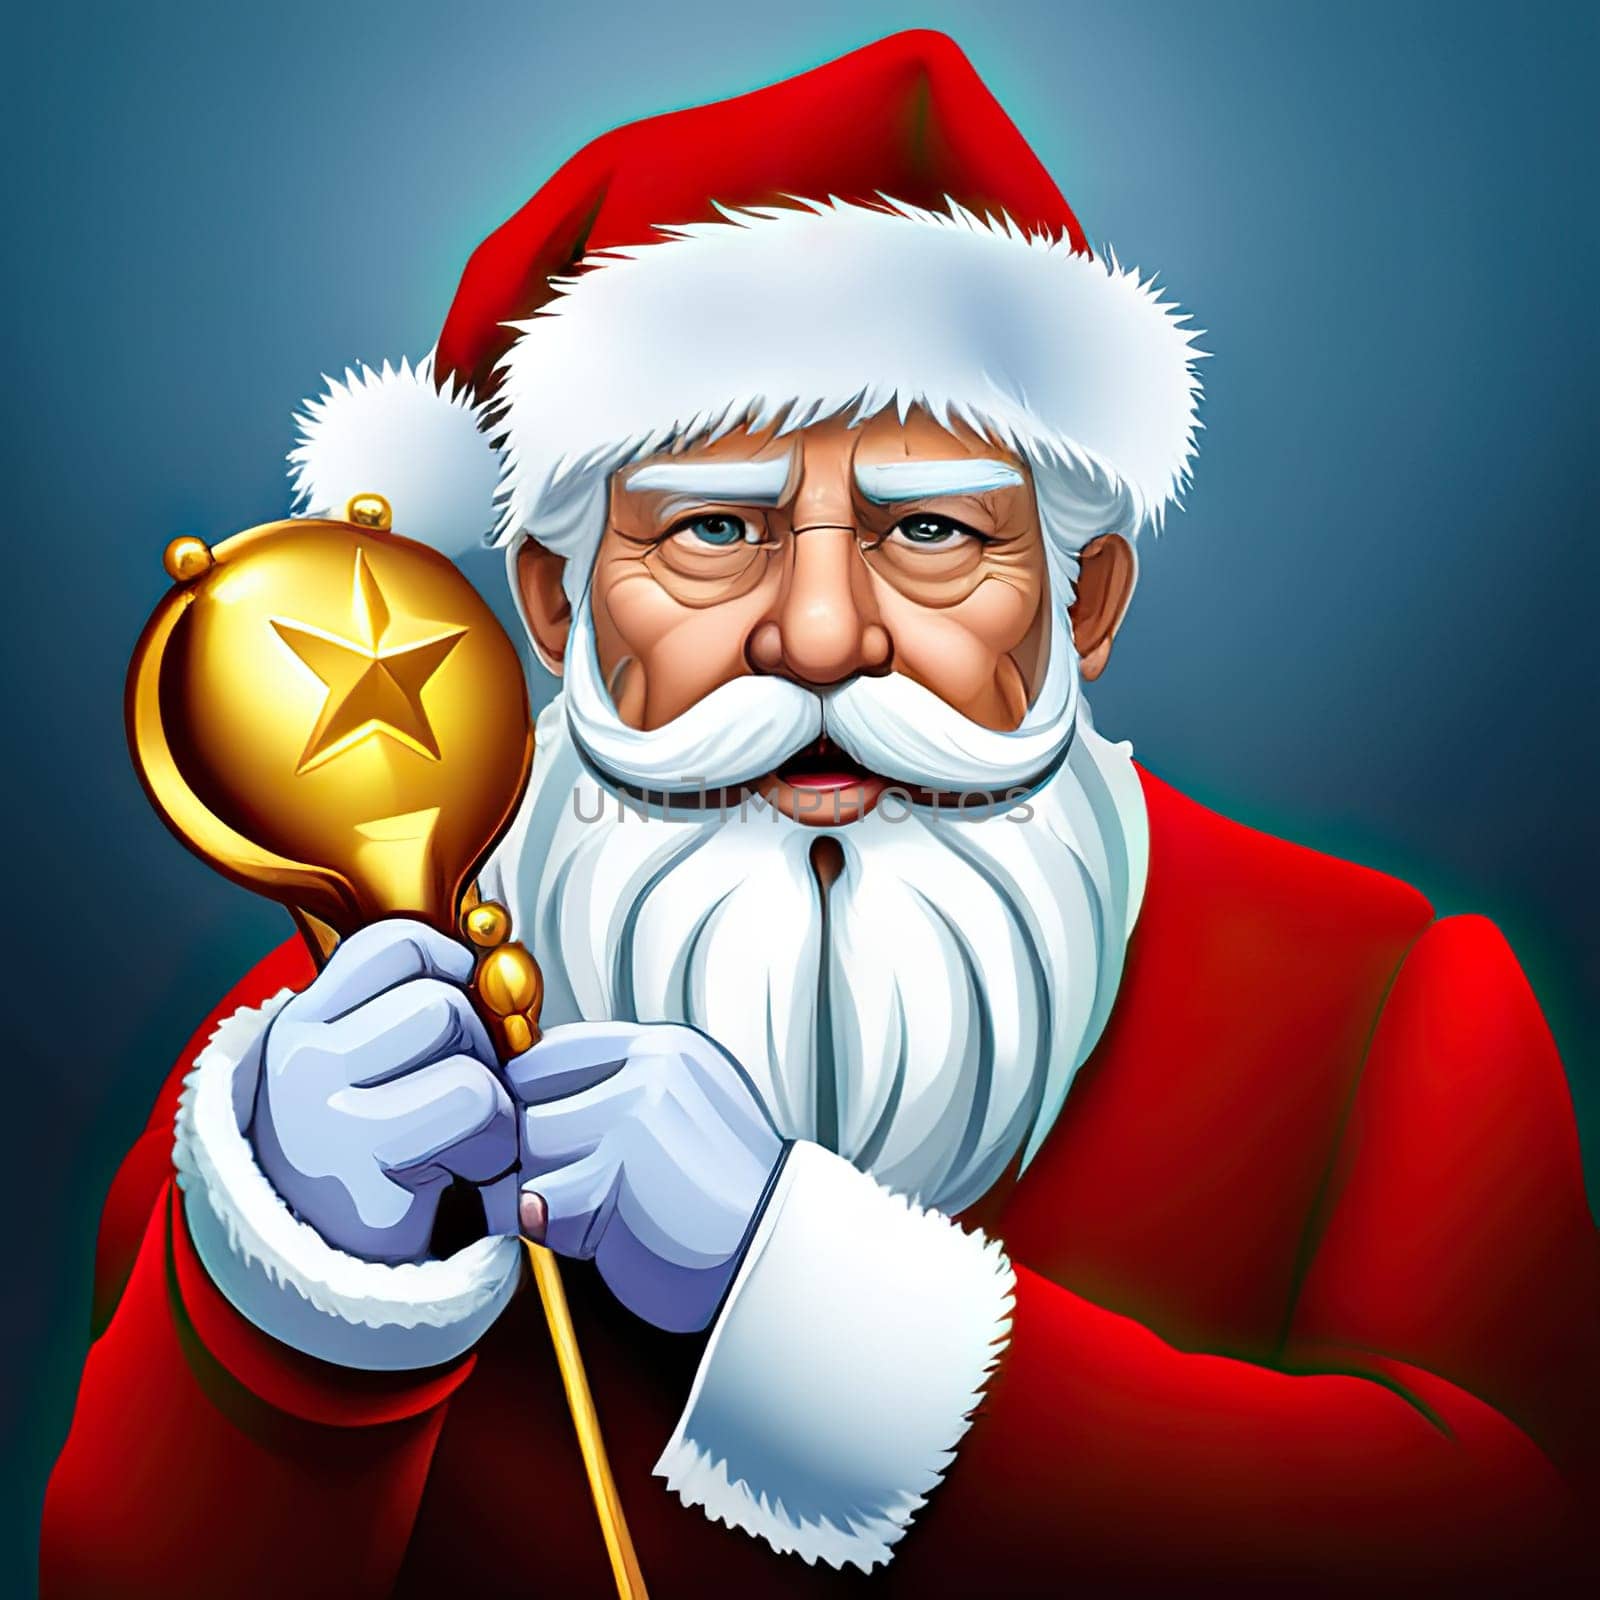 Merry Christmas and happy new year cartoon illustration of santa claus